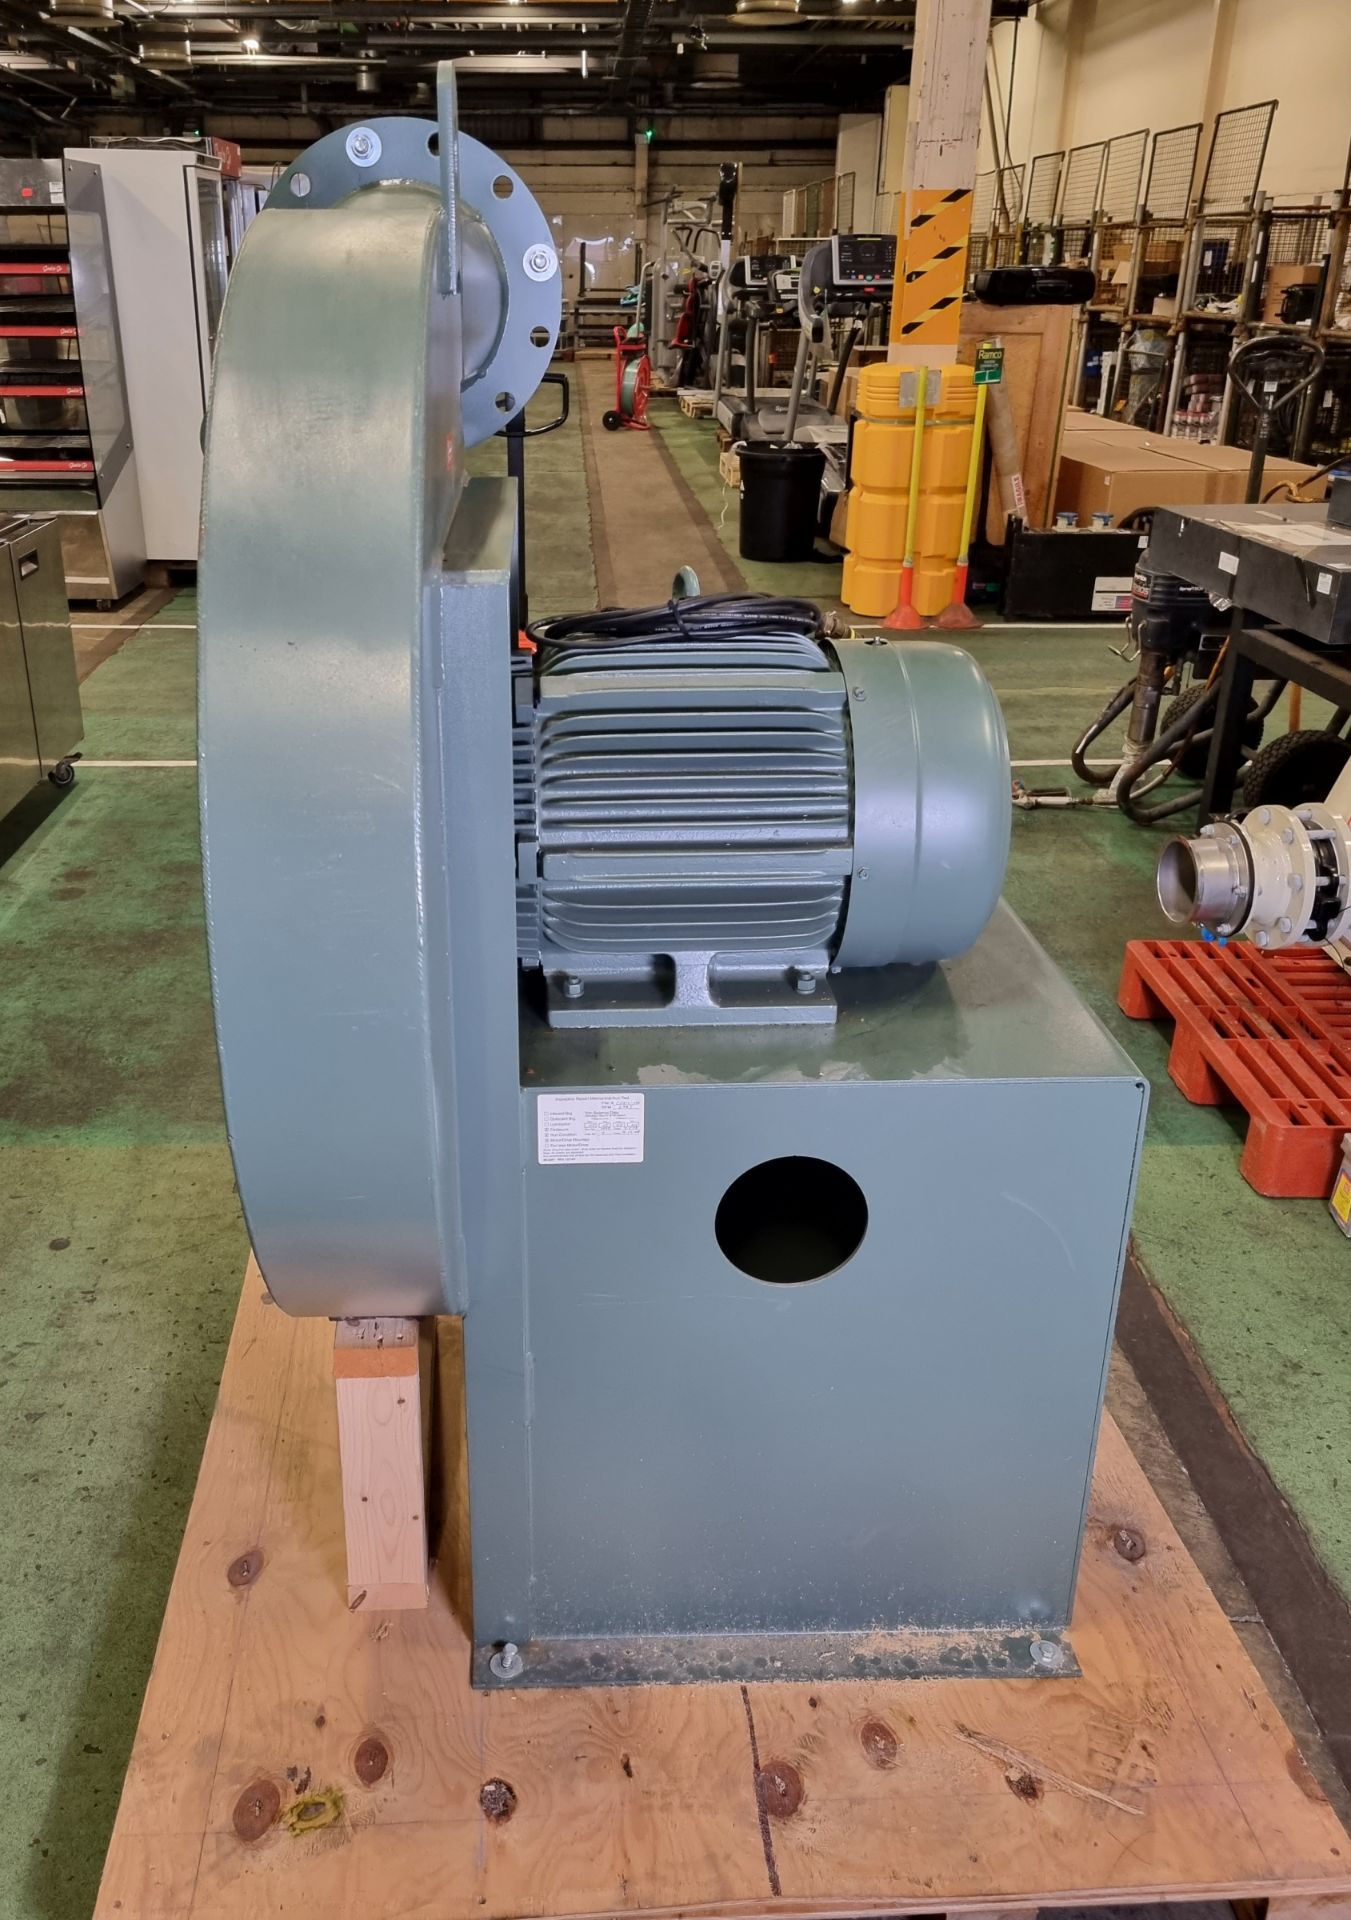 New York Blower A16699 100 high pressure blower - W 1300 x D 1000 x H 1600mm - Image 4 of 11